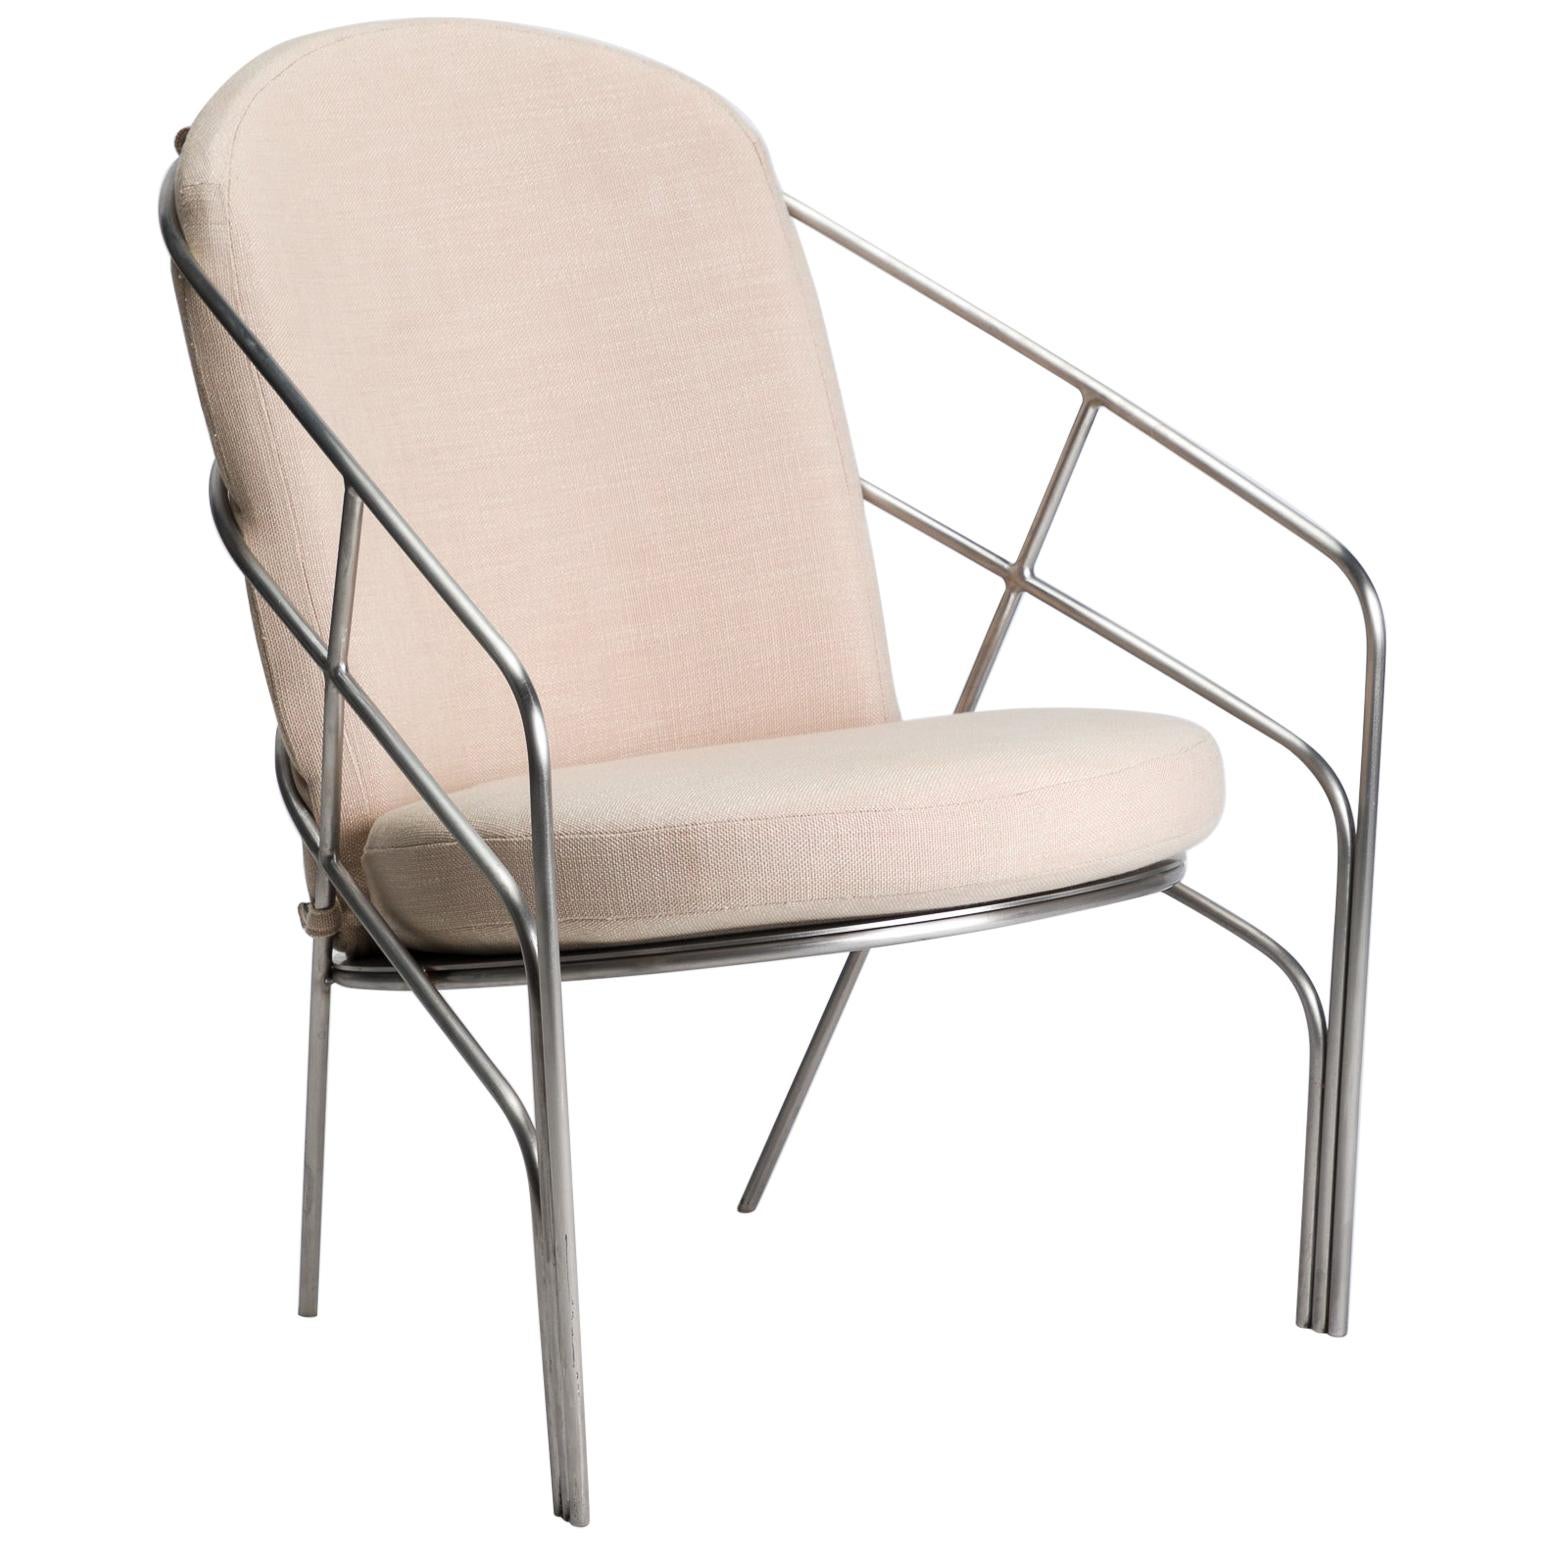 DeMille, Indoor/Outdoor Polished Stainless Steel Lounge Chair by Laun